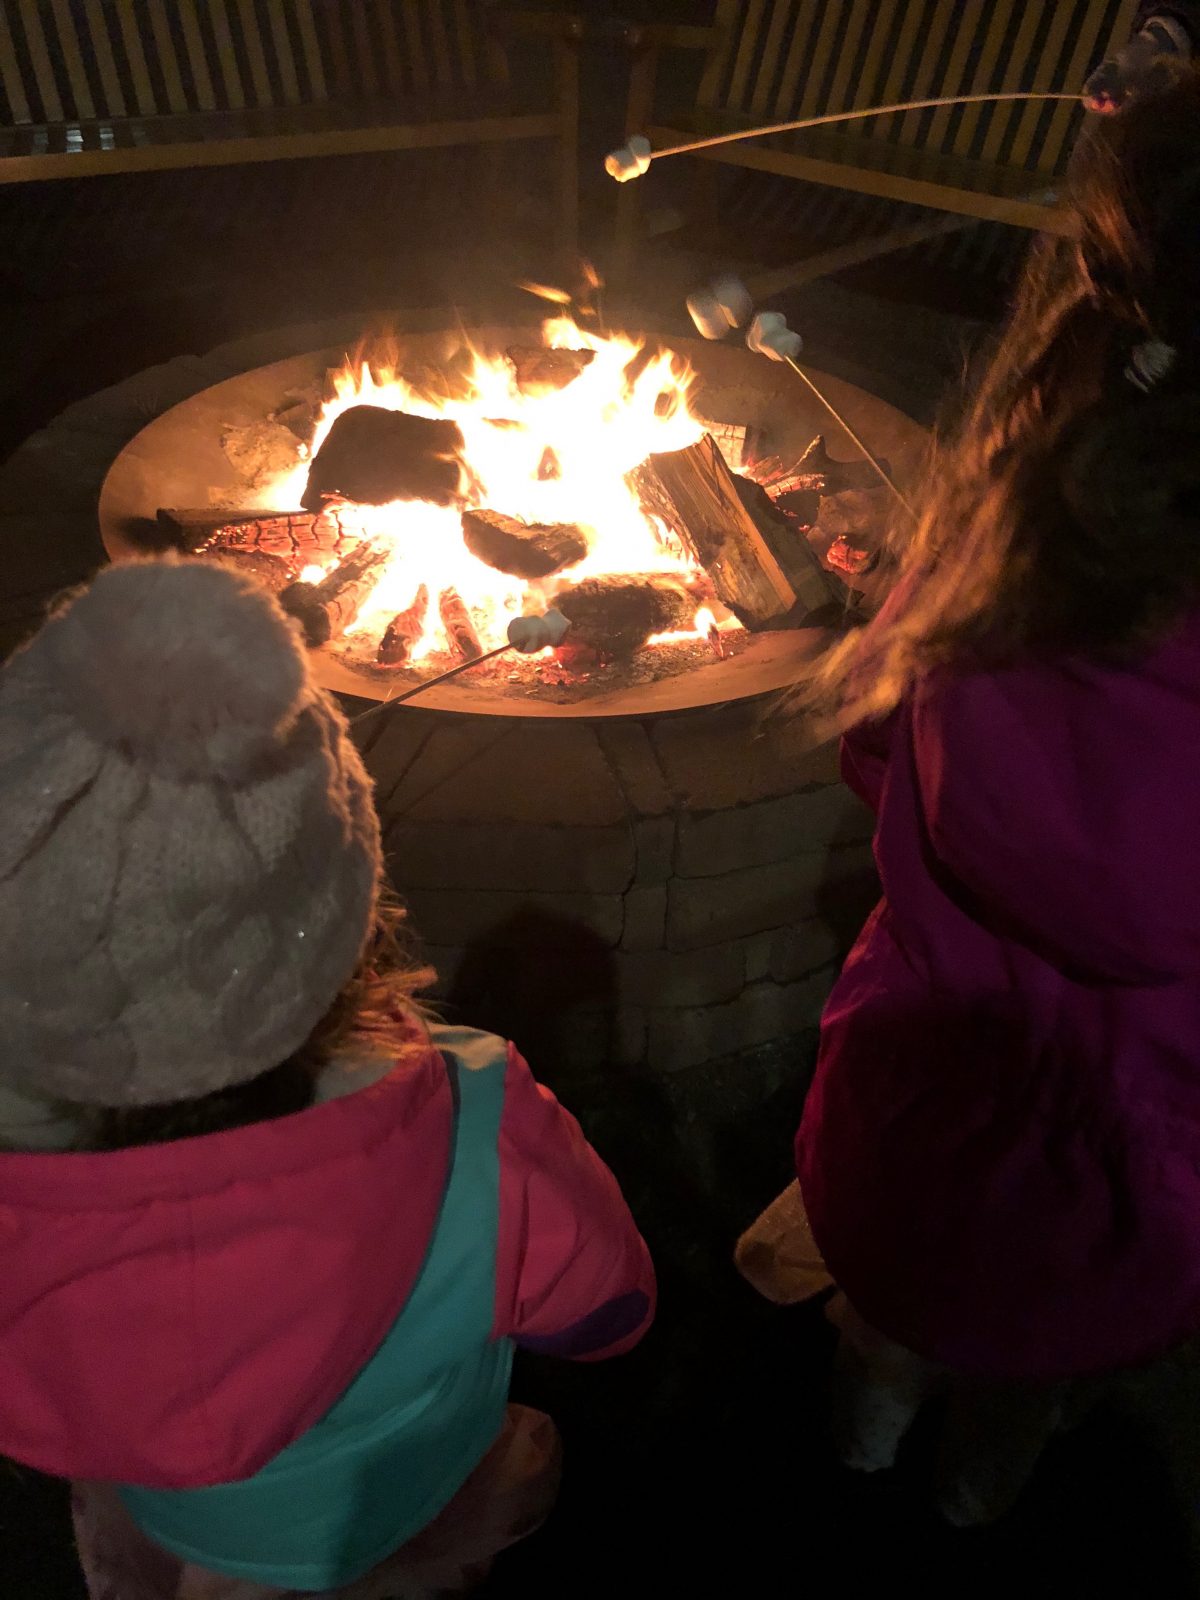 Making Smores at Woodloch Pines Resort in the Poconos Mountains